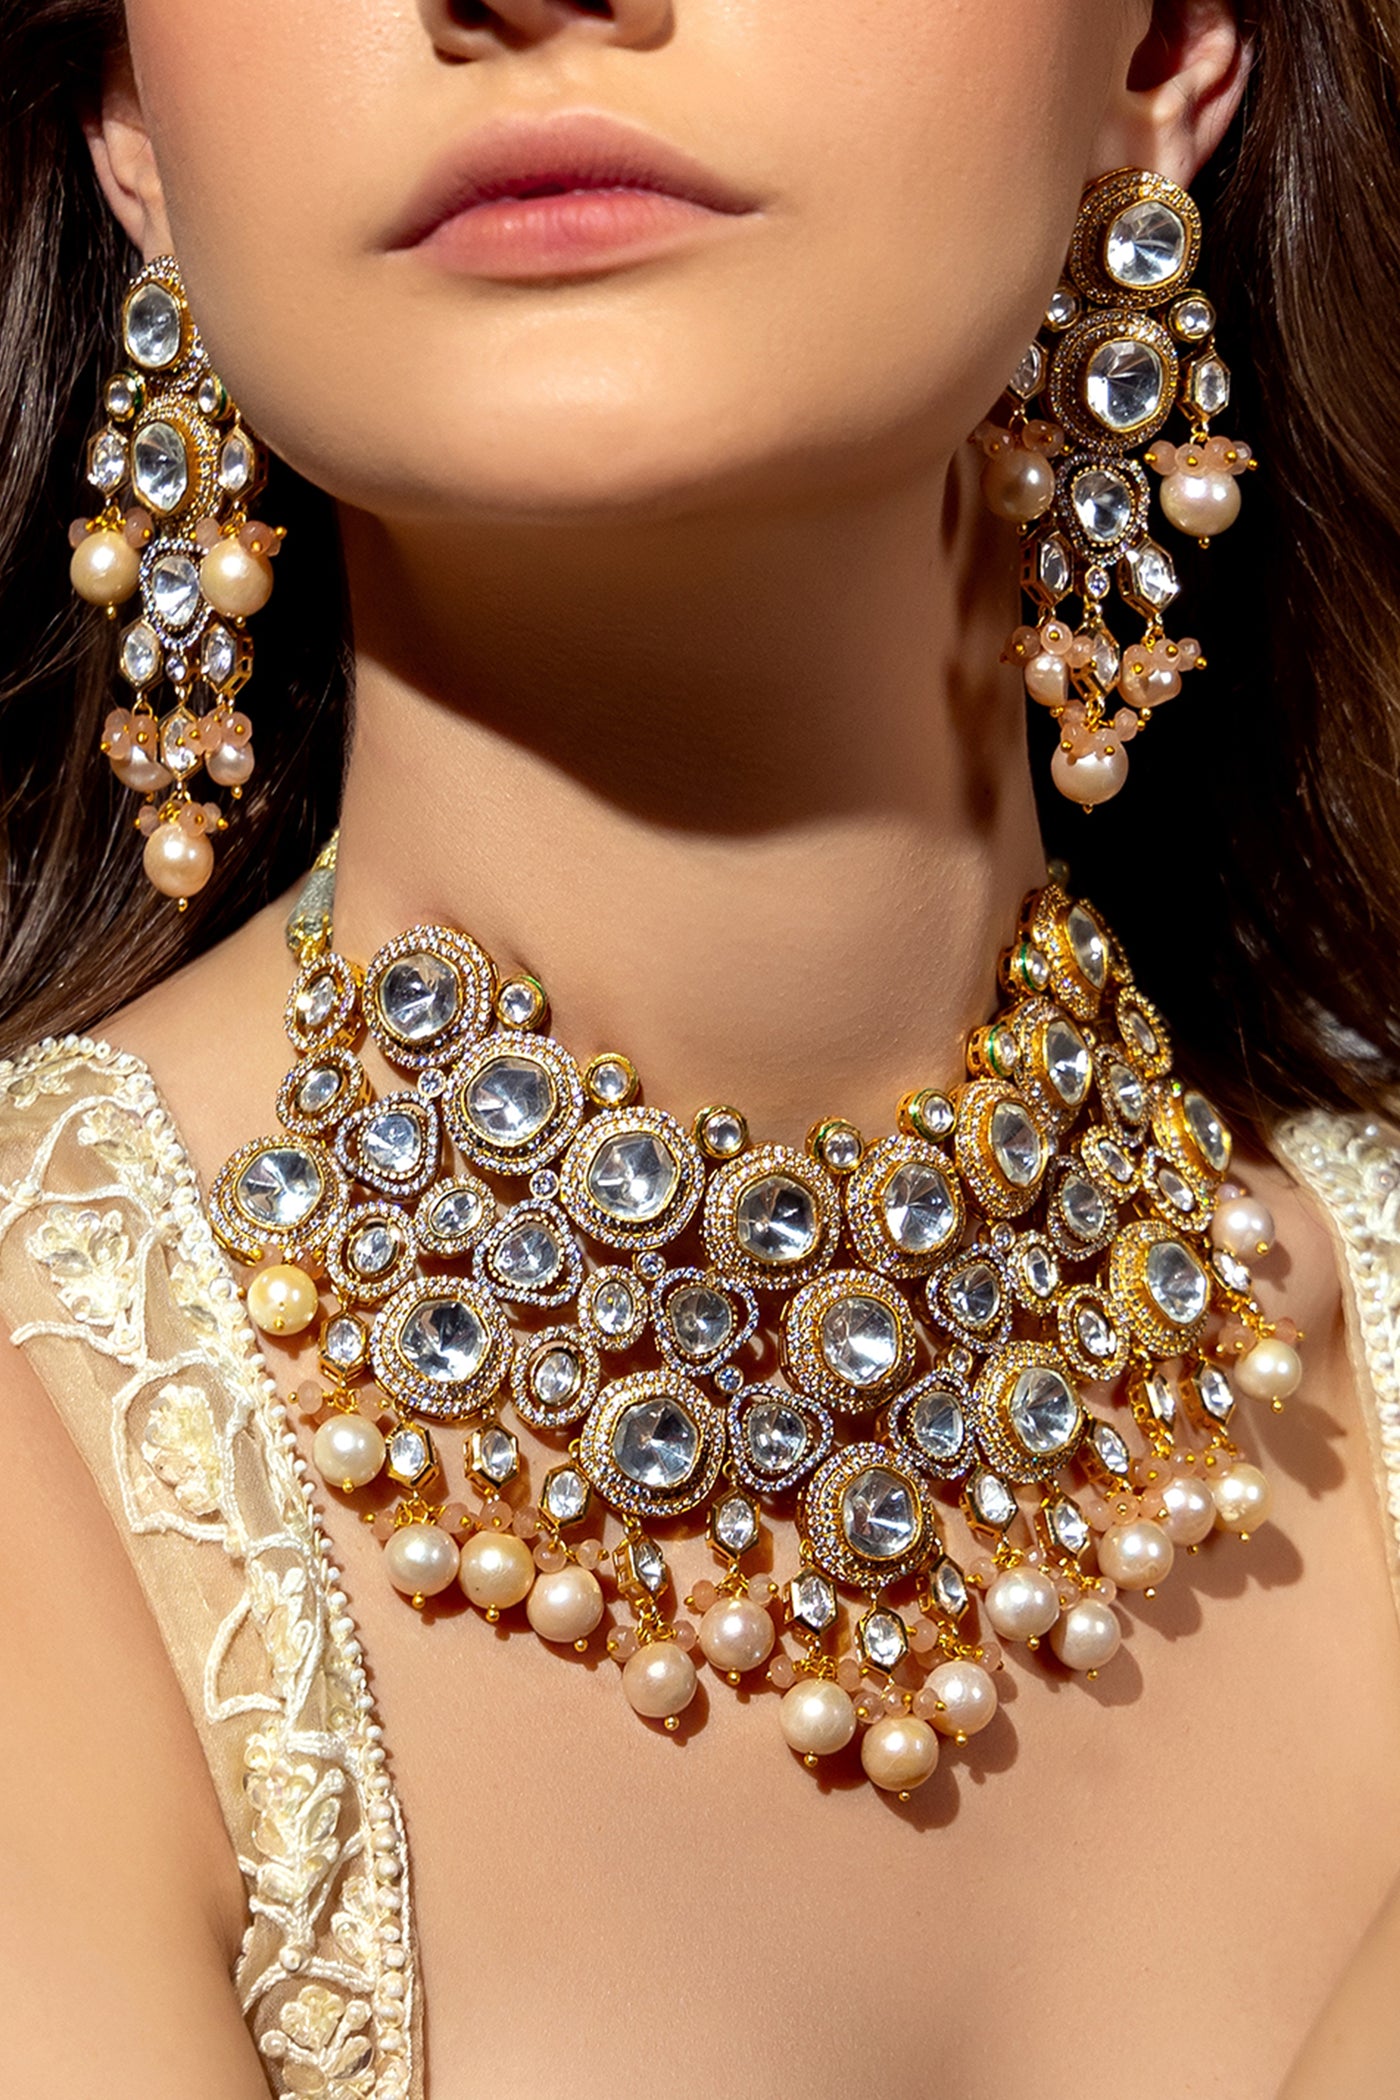 Joules by RadhikaBaroque Pearl And Polki Necklace Set jewellery indian designer wear online shopping melange singapore